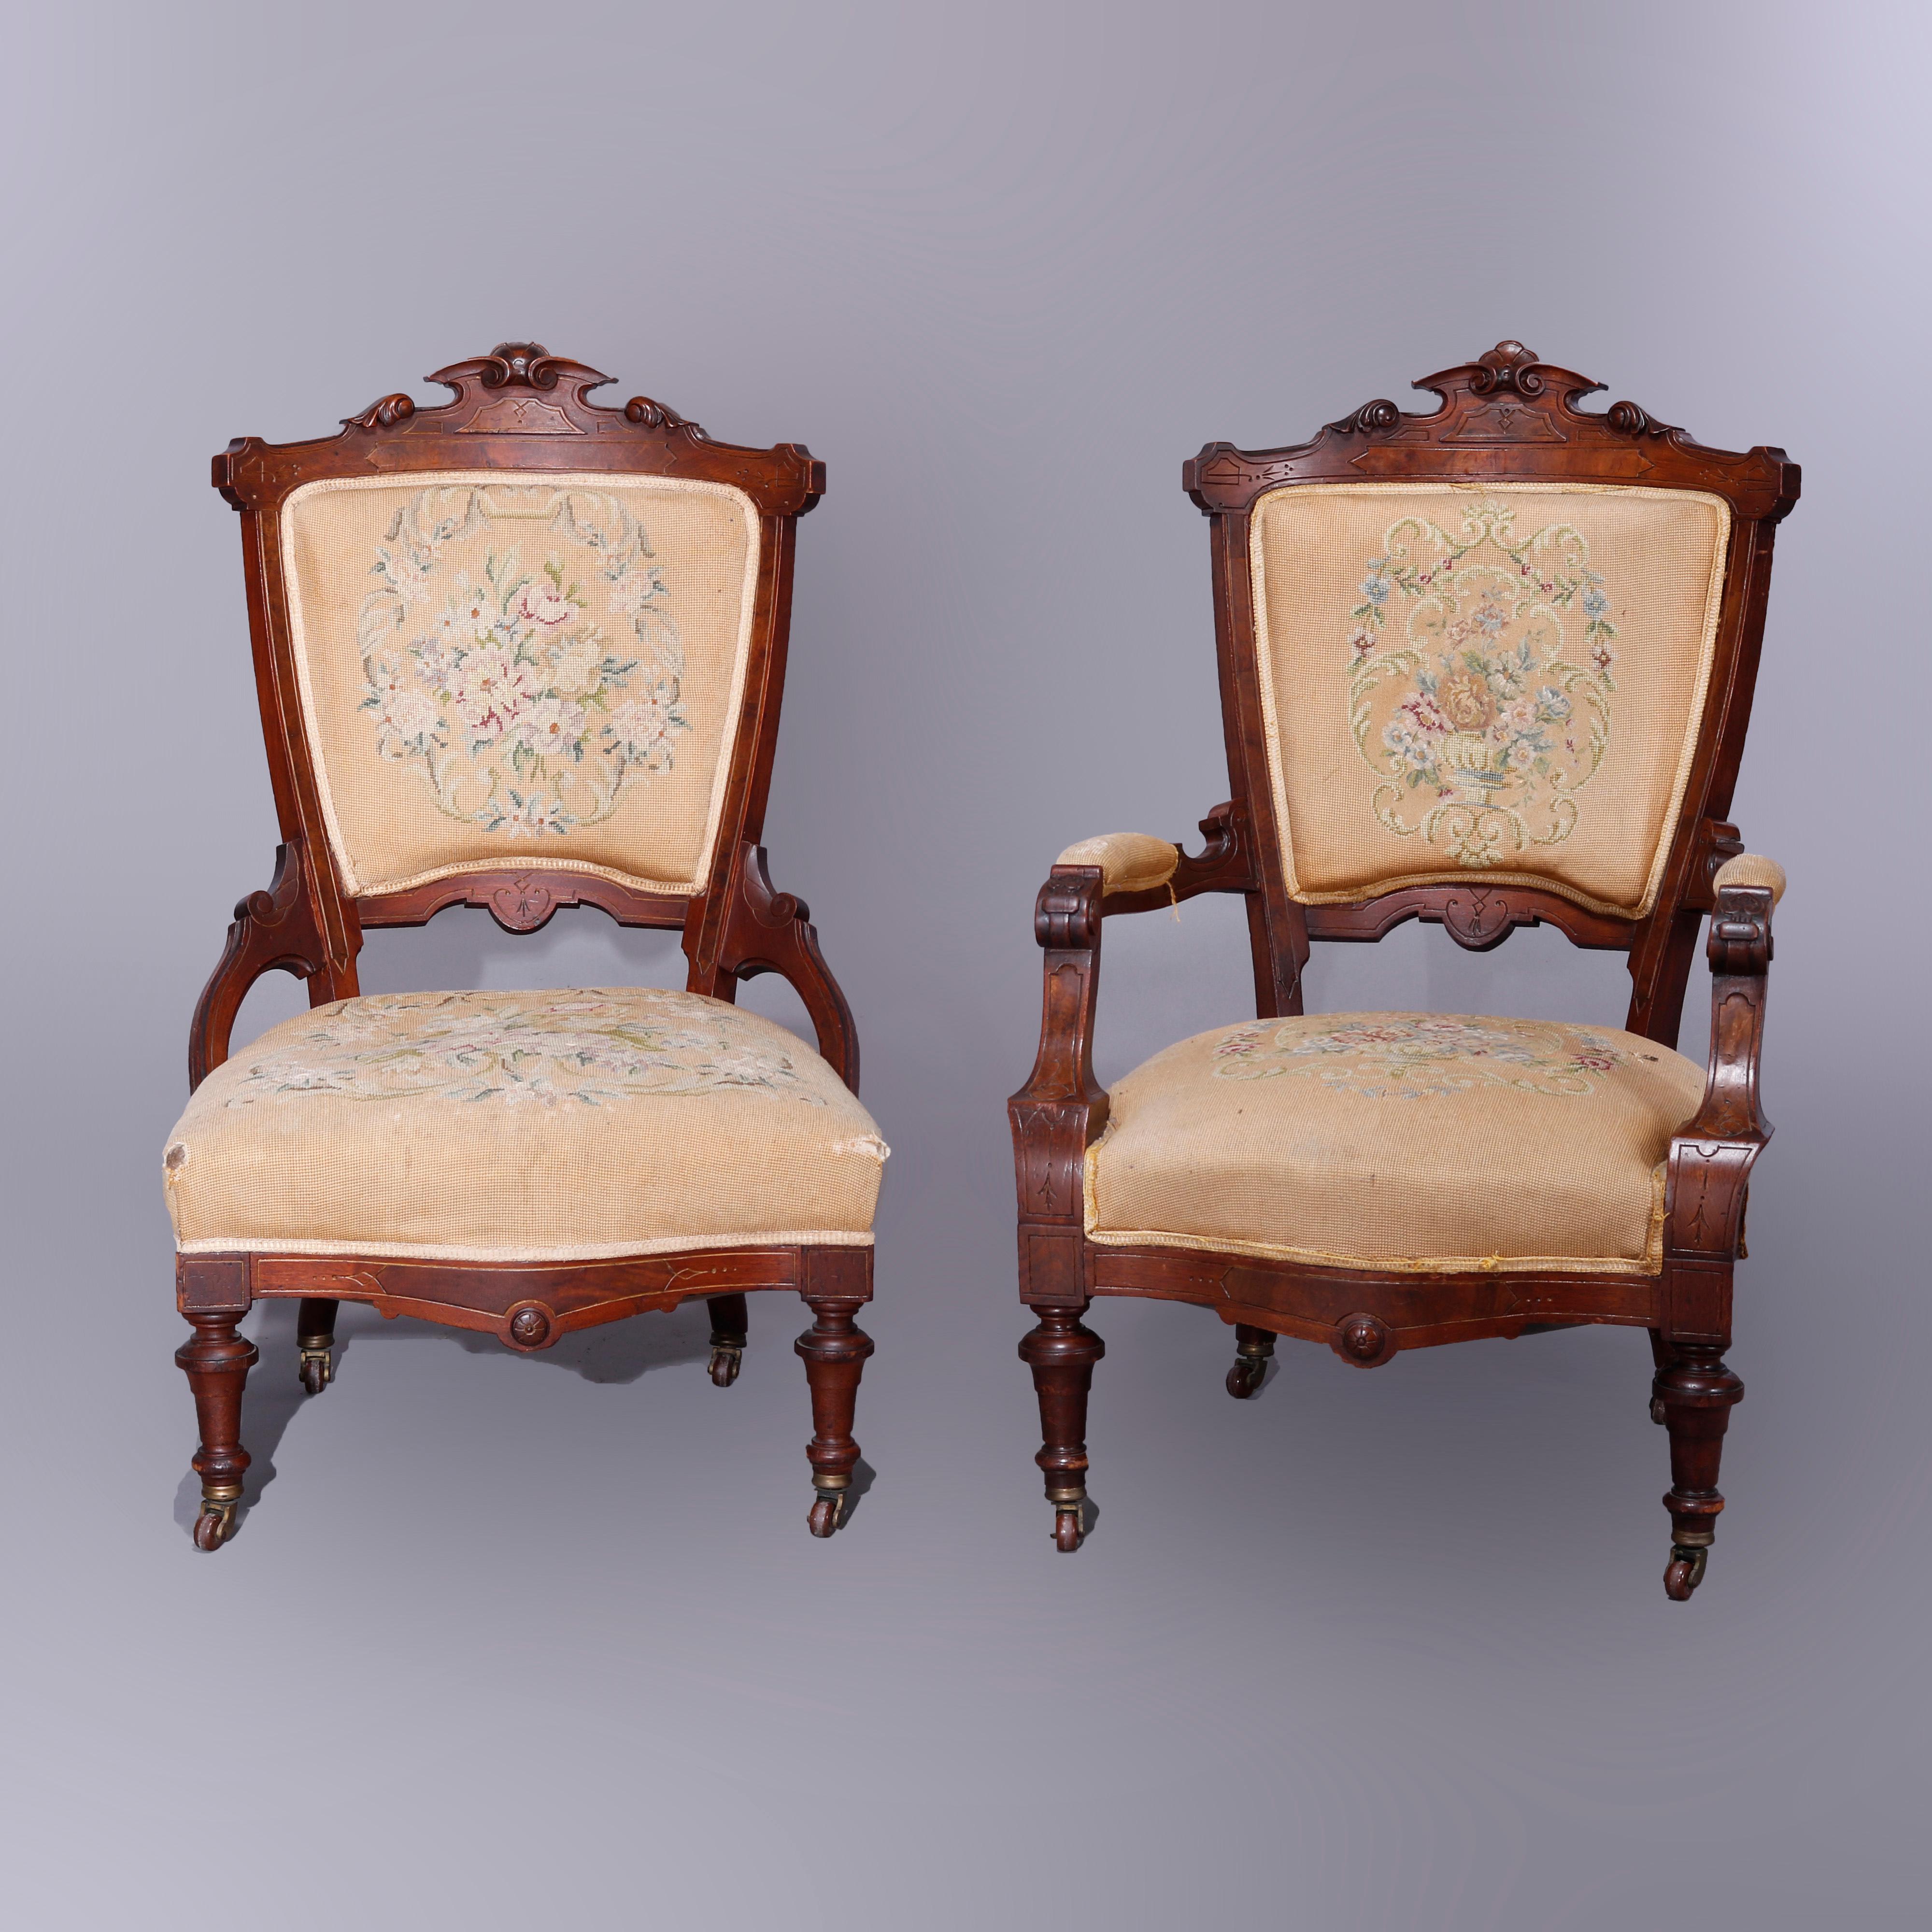 An antique pair of Renaissance Revival parlor chairs offers walnut and burl construction with carved crest having foliate elements and surmounting floral needlepoint back and seat, raised on balustrade legs, set includes gentleman's armchair and